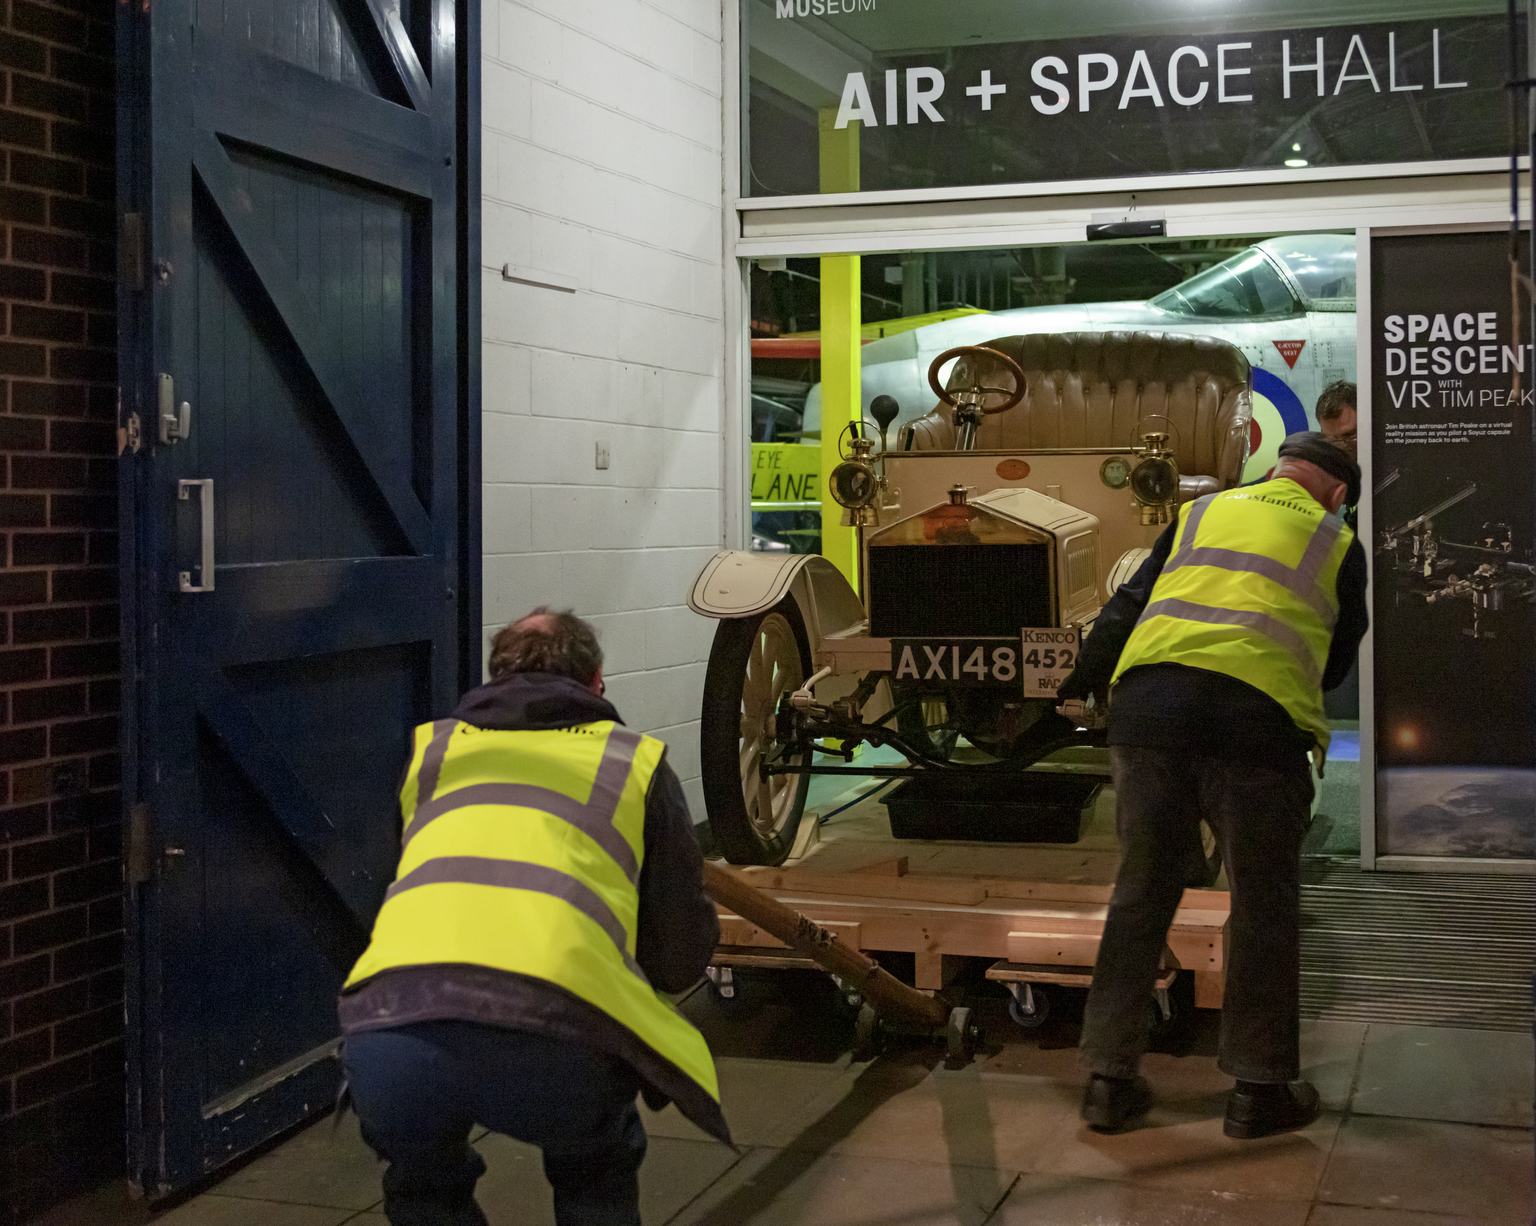 The Rolls-Royce being moved out of the Air and Space Hall